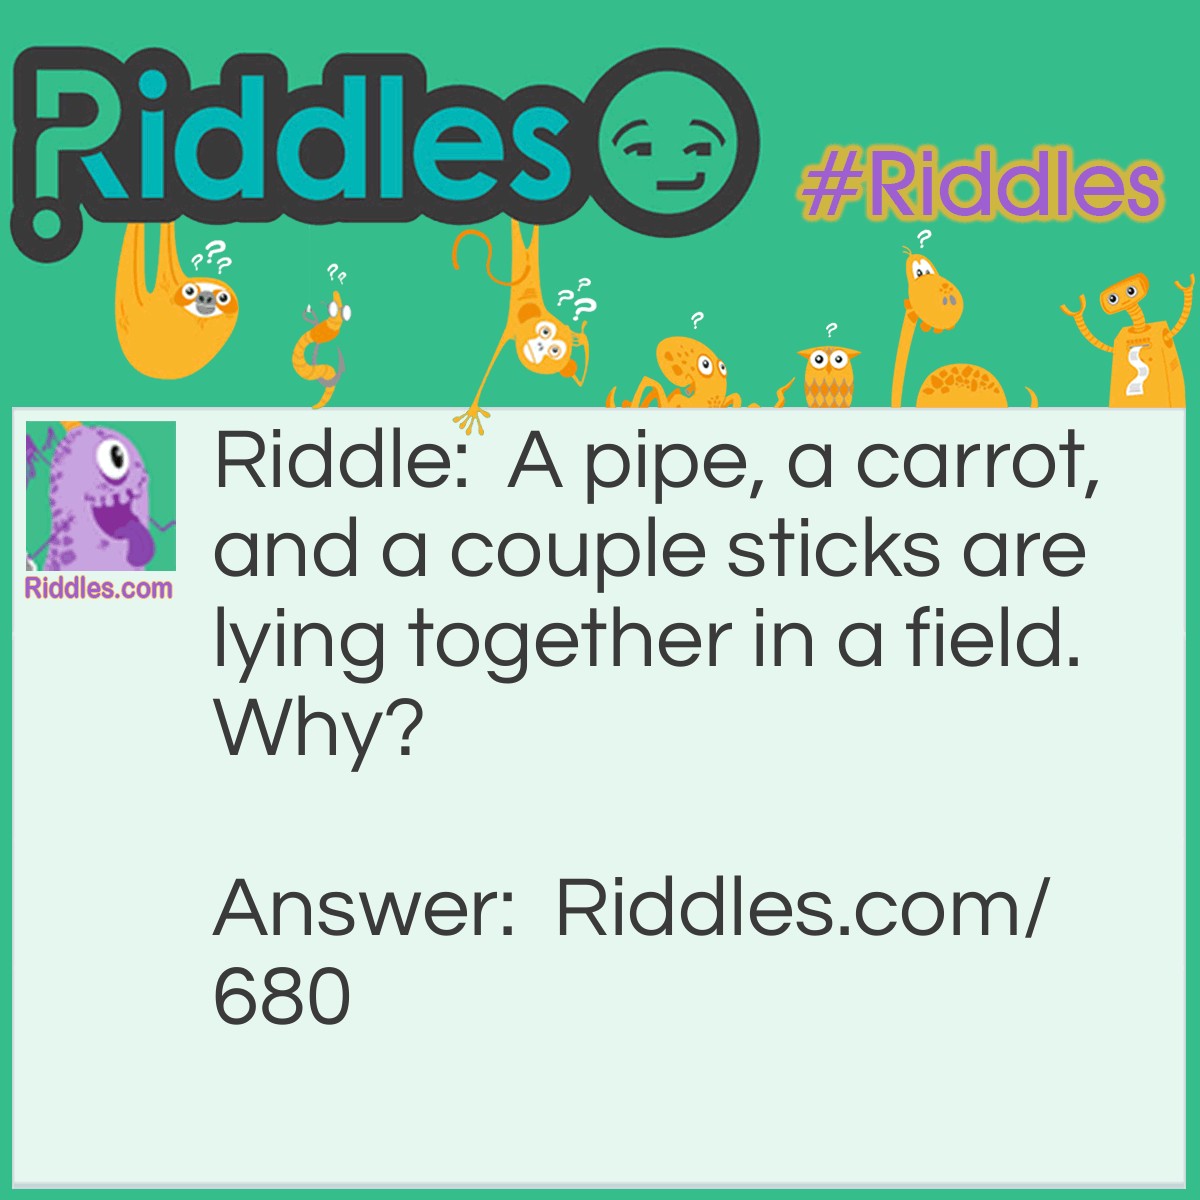 Riddle: A pipe, a carrot, and a couple sticks are lying together in a field. Why? Answer: They're what is left of a melted snowman.